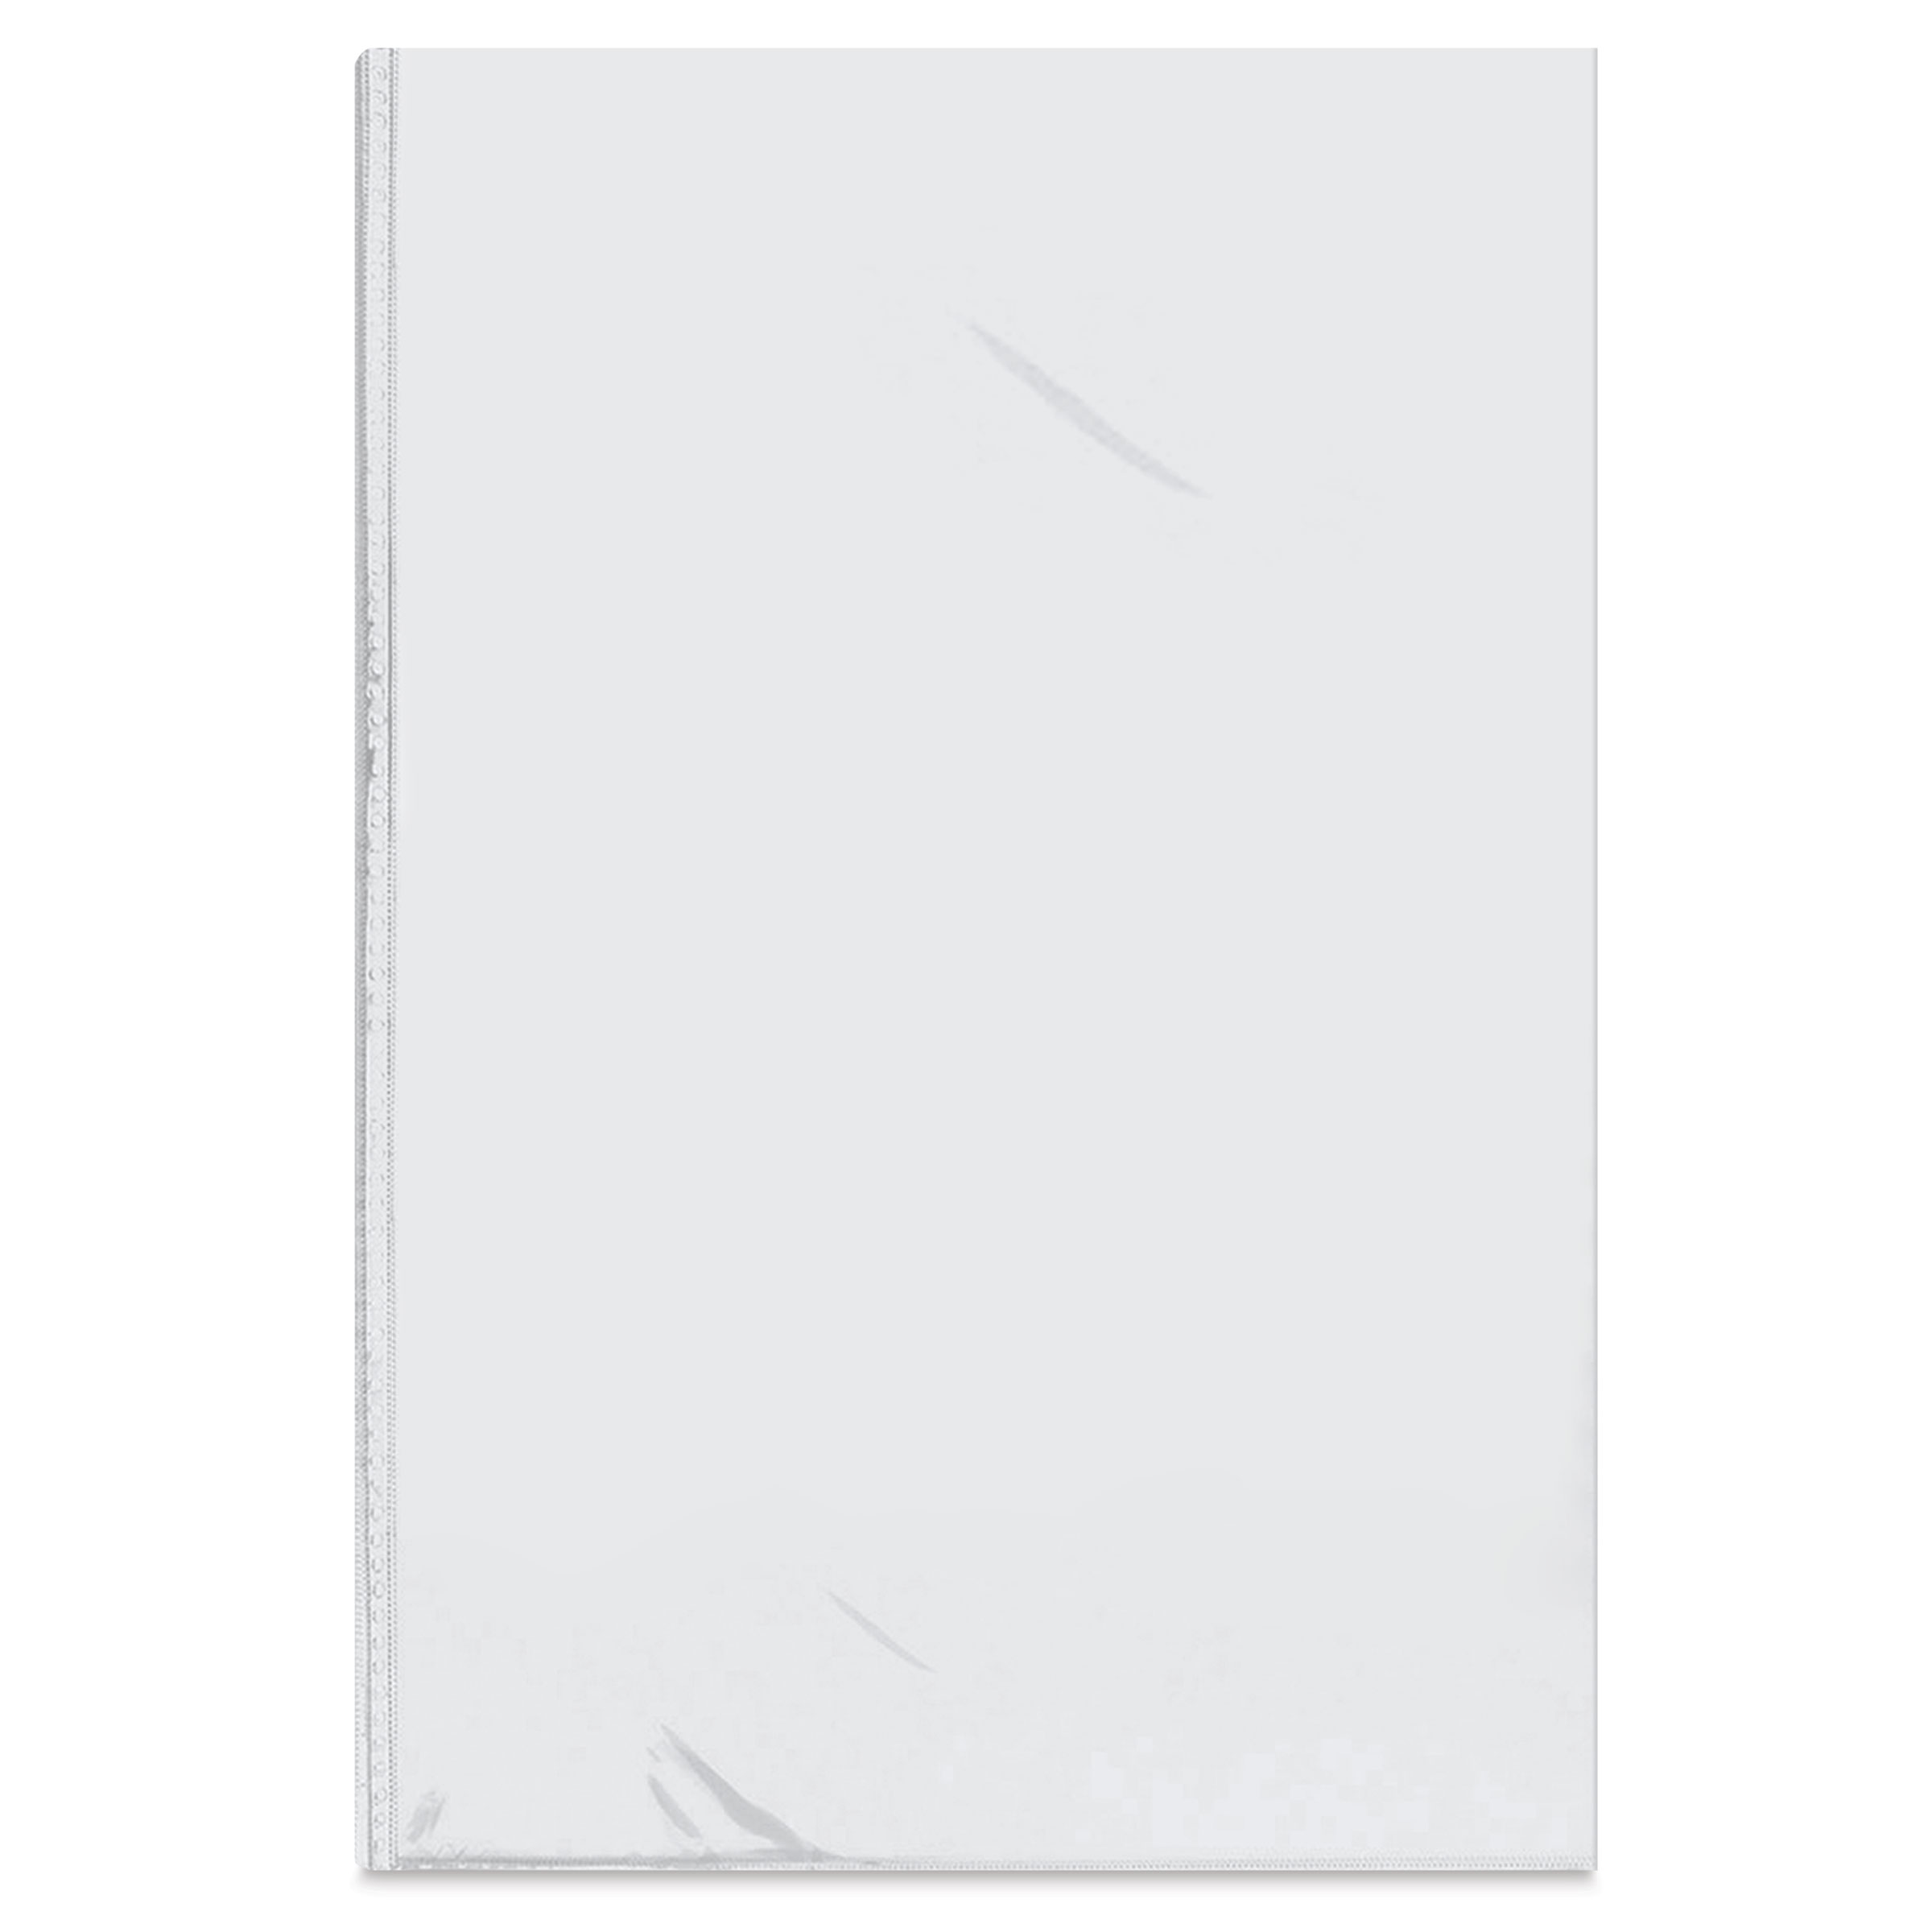 The Art Profolio Multi-Ring 24x36 Refillable Binder by Itoya with